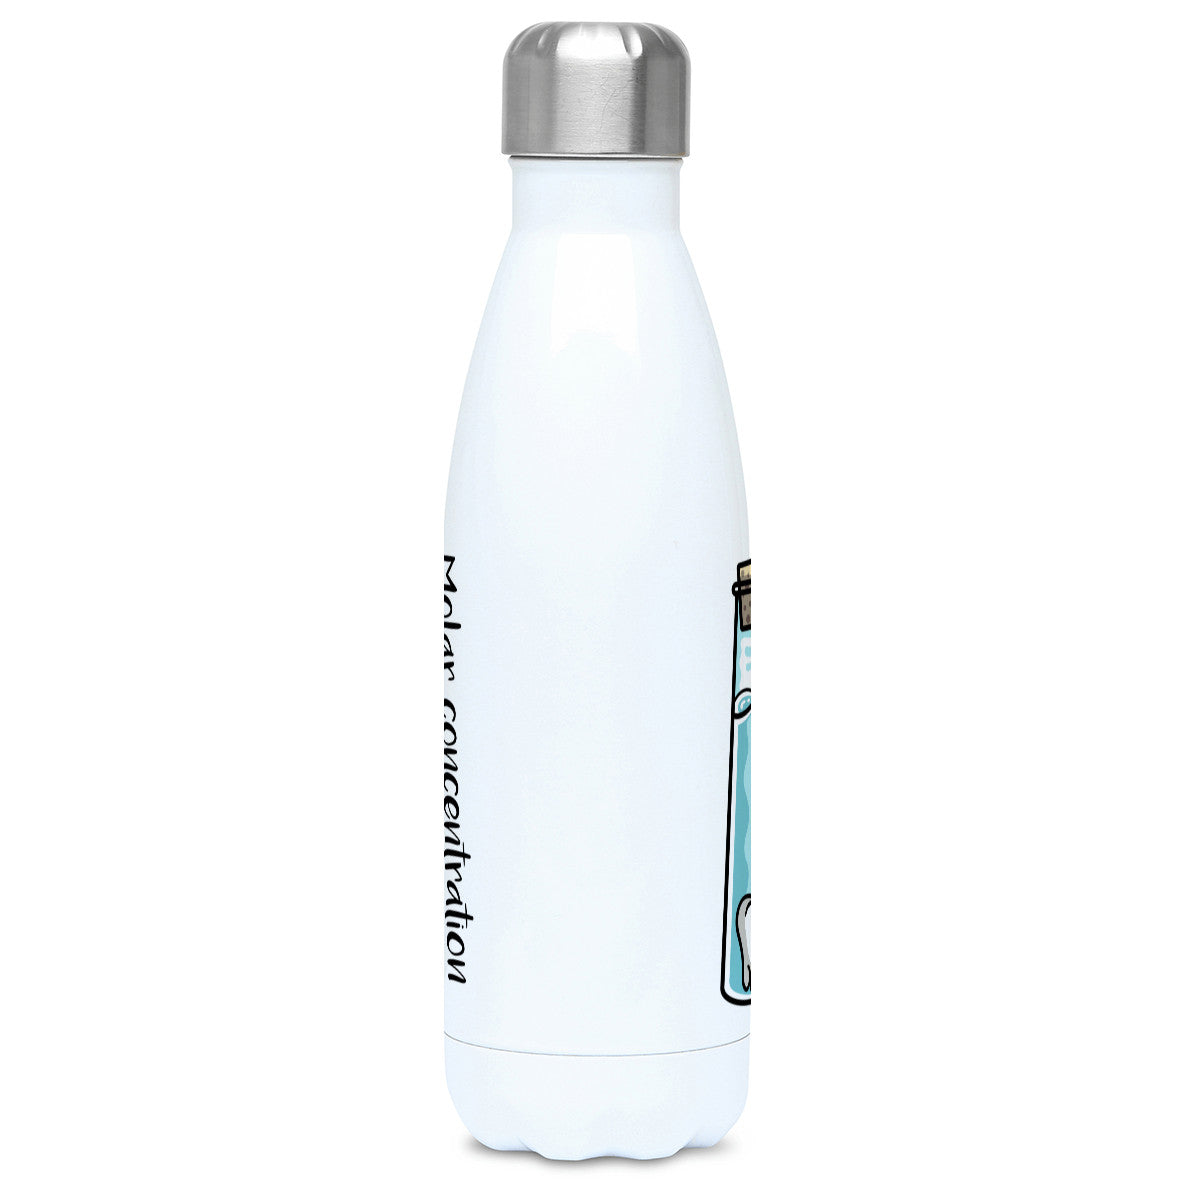 A corked chemistry vessel of liquid containing a molar tooth design on a white metal insulated drinks bottle, side view